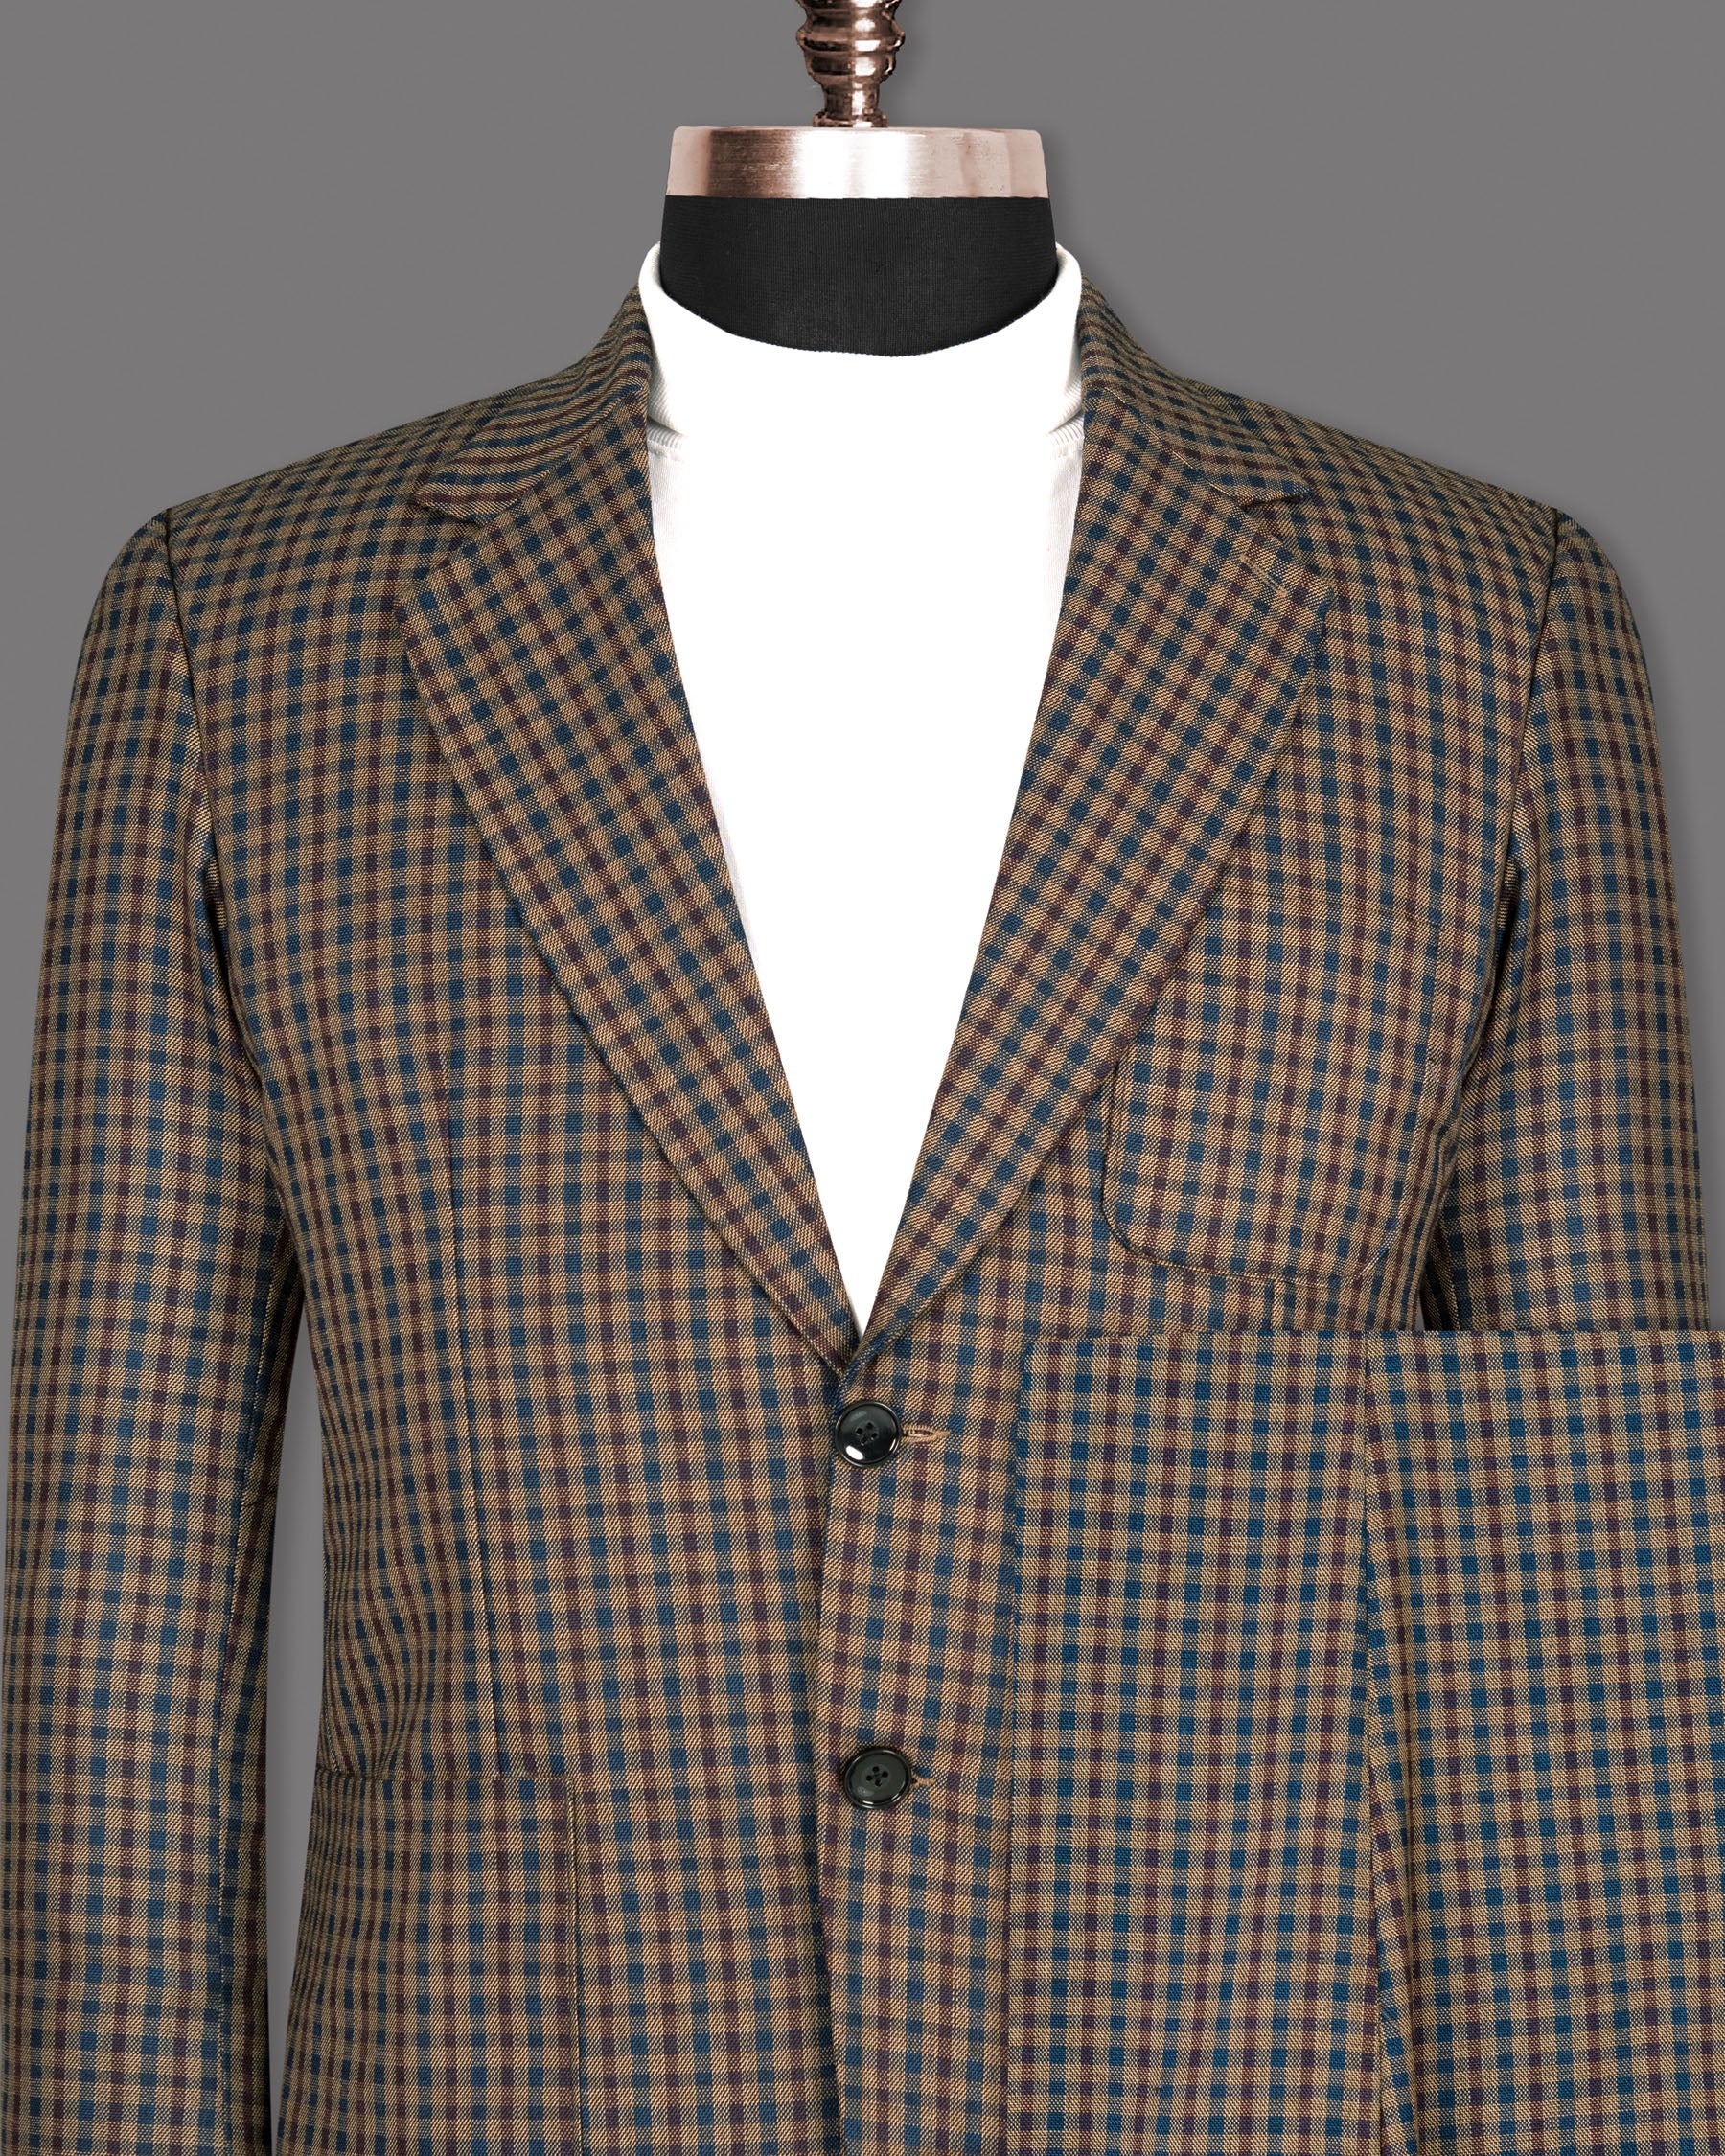 Givry and STumine Gingham Woolrich Suit ST1277-SB-PP-36, ST1277-SB-PP-38, ST1277-SB-PP-40, ST1277-SB-PP-42, ST1277-SB-PP-44, ST1277-SB-PP-46, ST1277-SB-PP-48, ST1277-SB-PP-50, ST1277-SB-PP-56, ST1277-SB-PP-52, ST1277-SB-PP-54, ST1277-SB-PP-58, ST1277-SB-PP-60